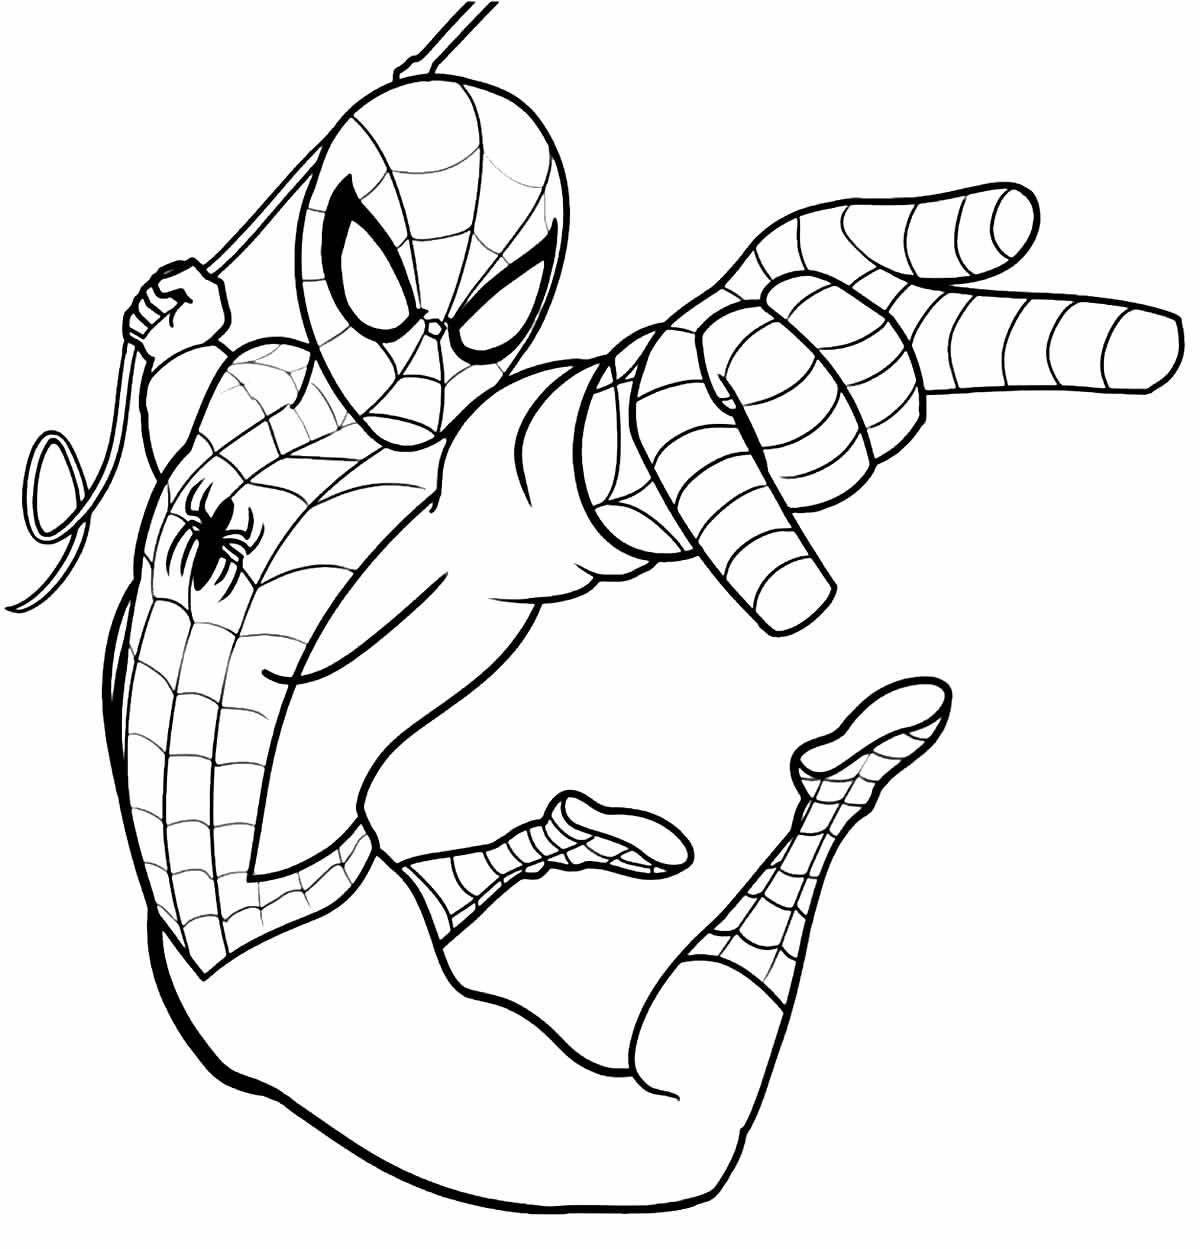 Adorable spiderman coloring book for boys